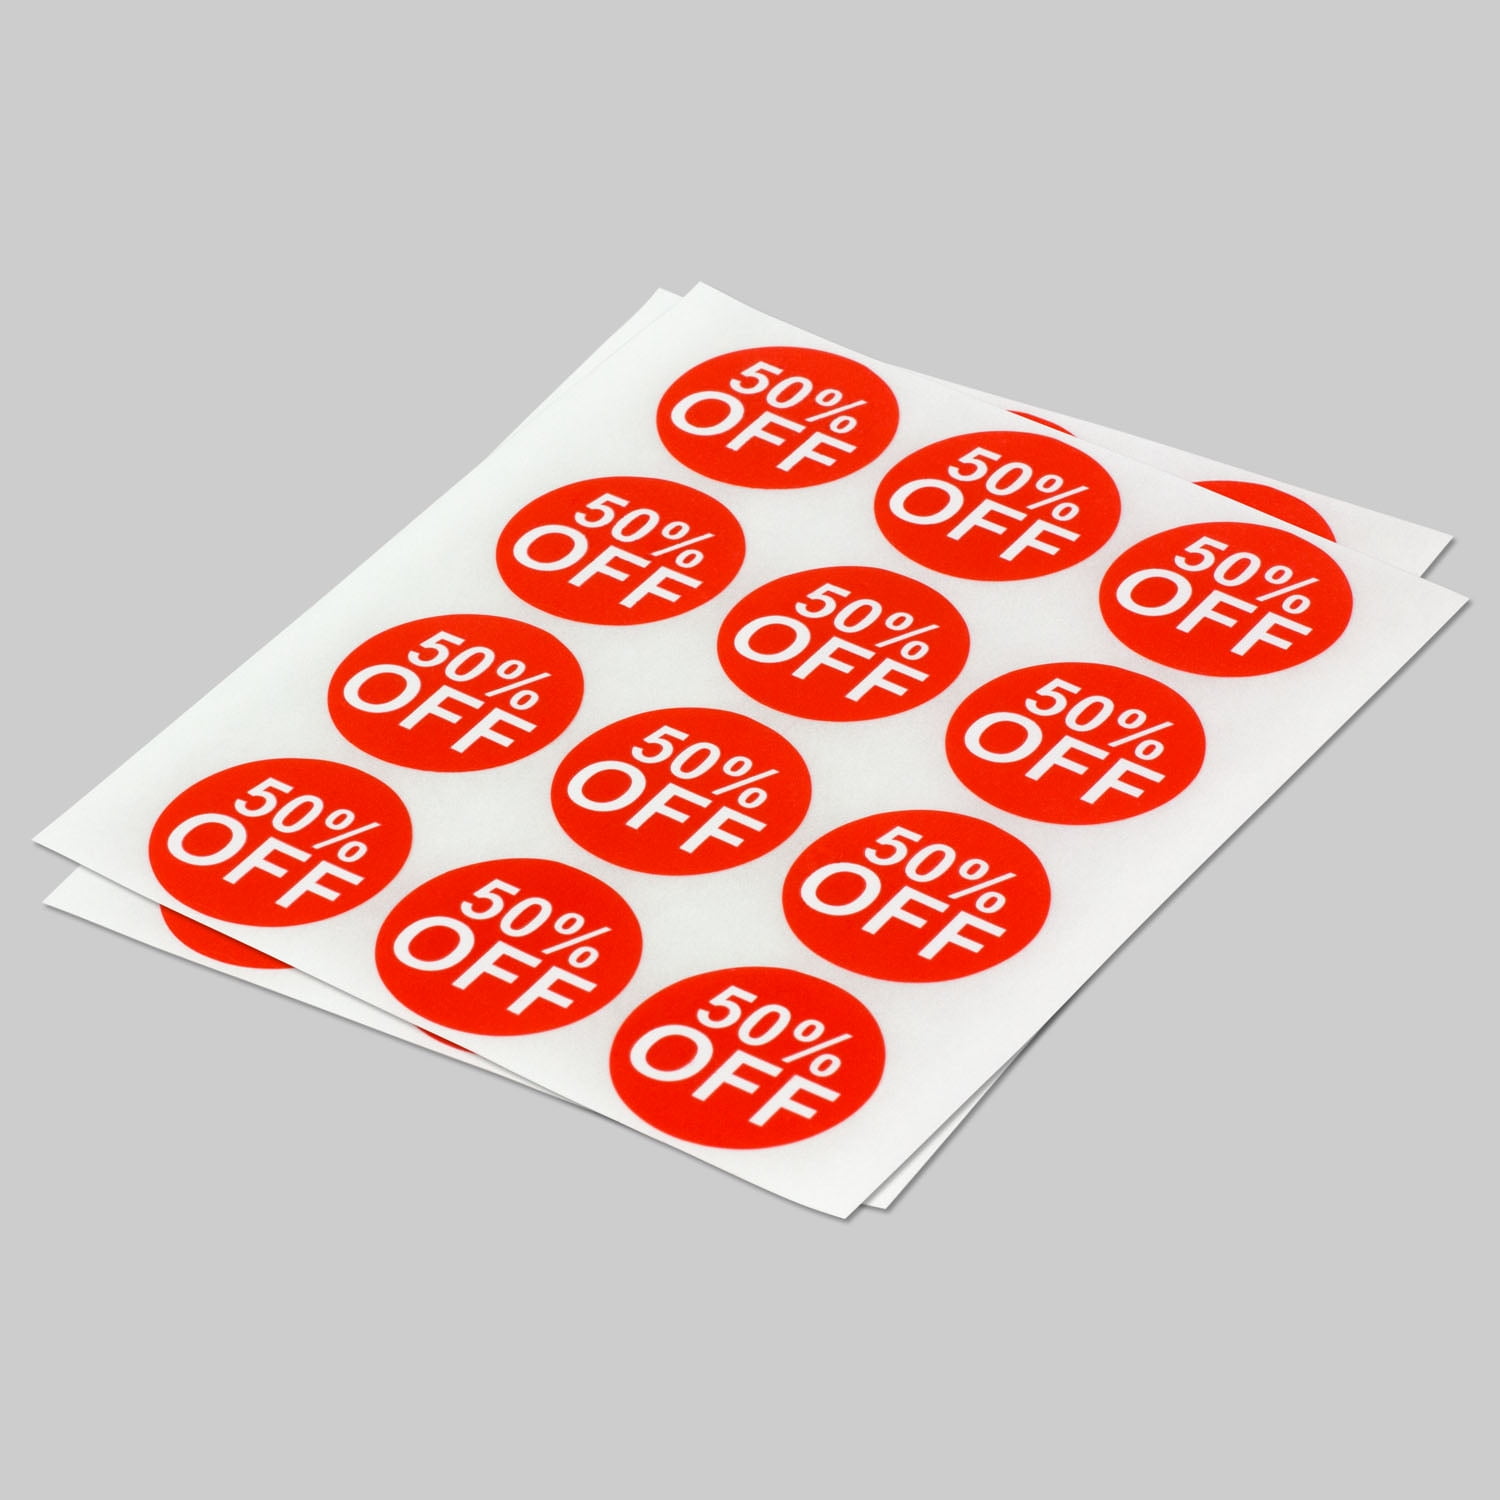 1.5 Inches Round Percent Off Retail Sale Stickers 7 Choices 500 Labels Total 